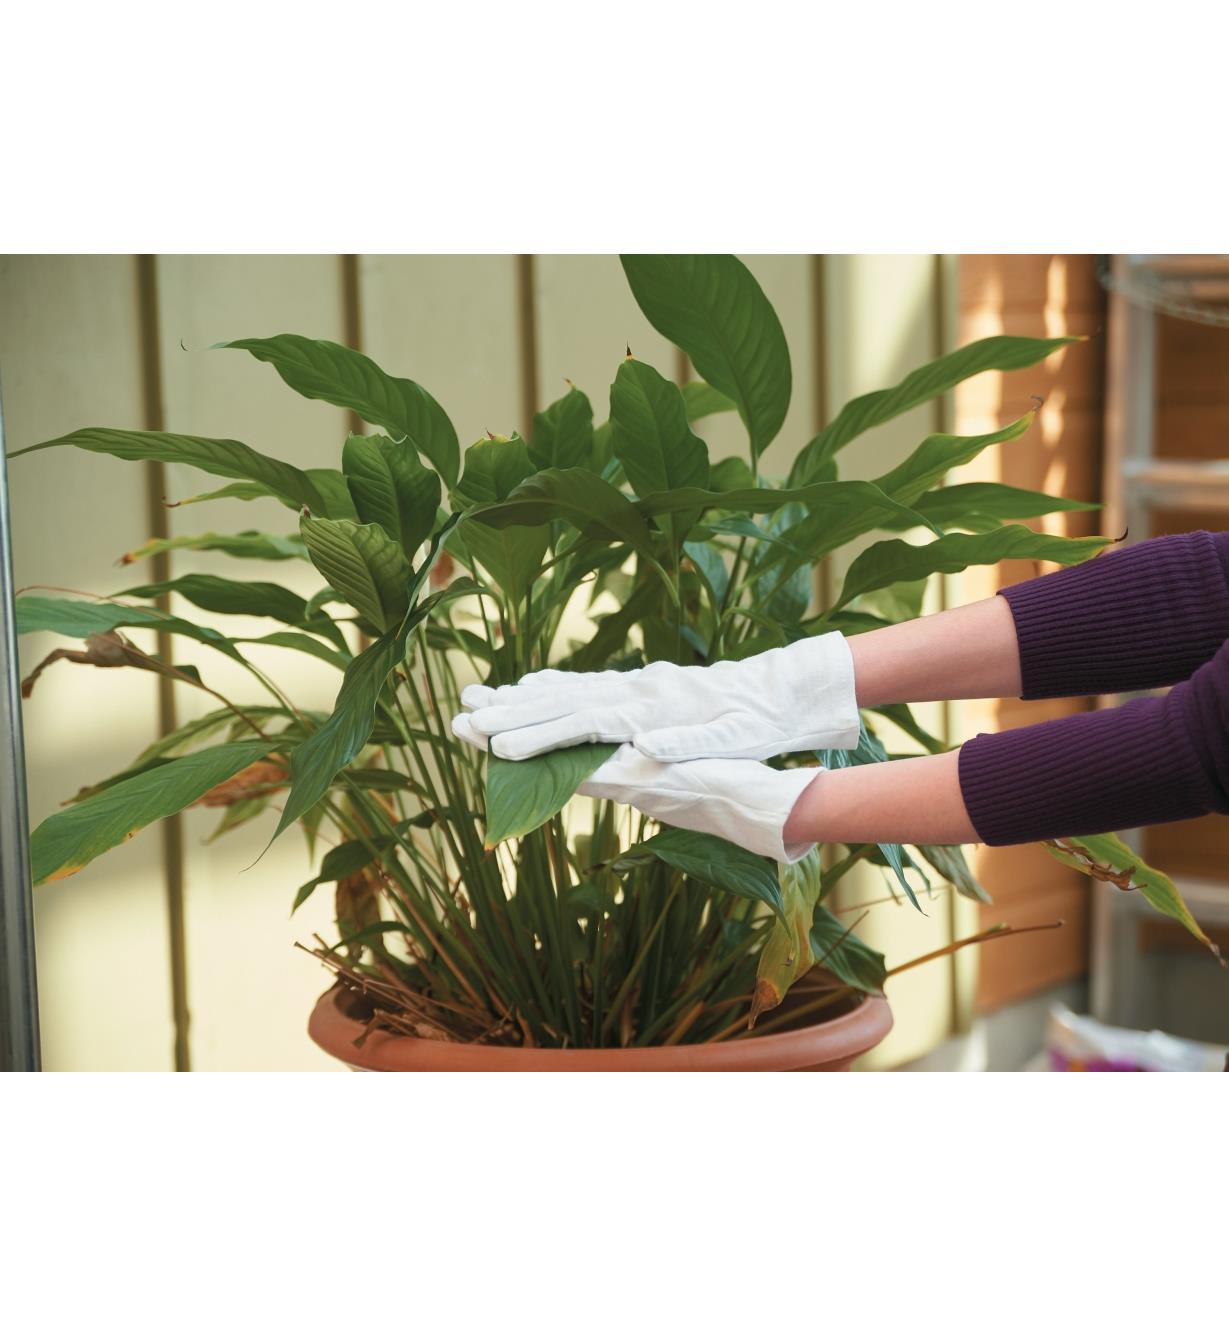 Wearing Cotton Utility Gloves while wiping down a houseplant 